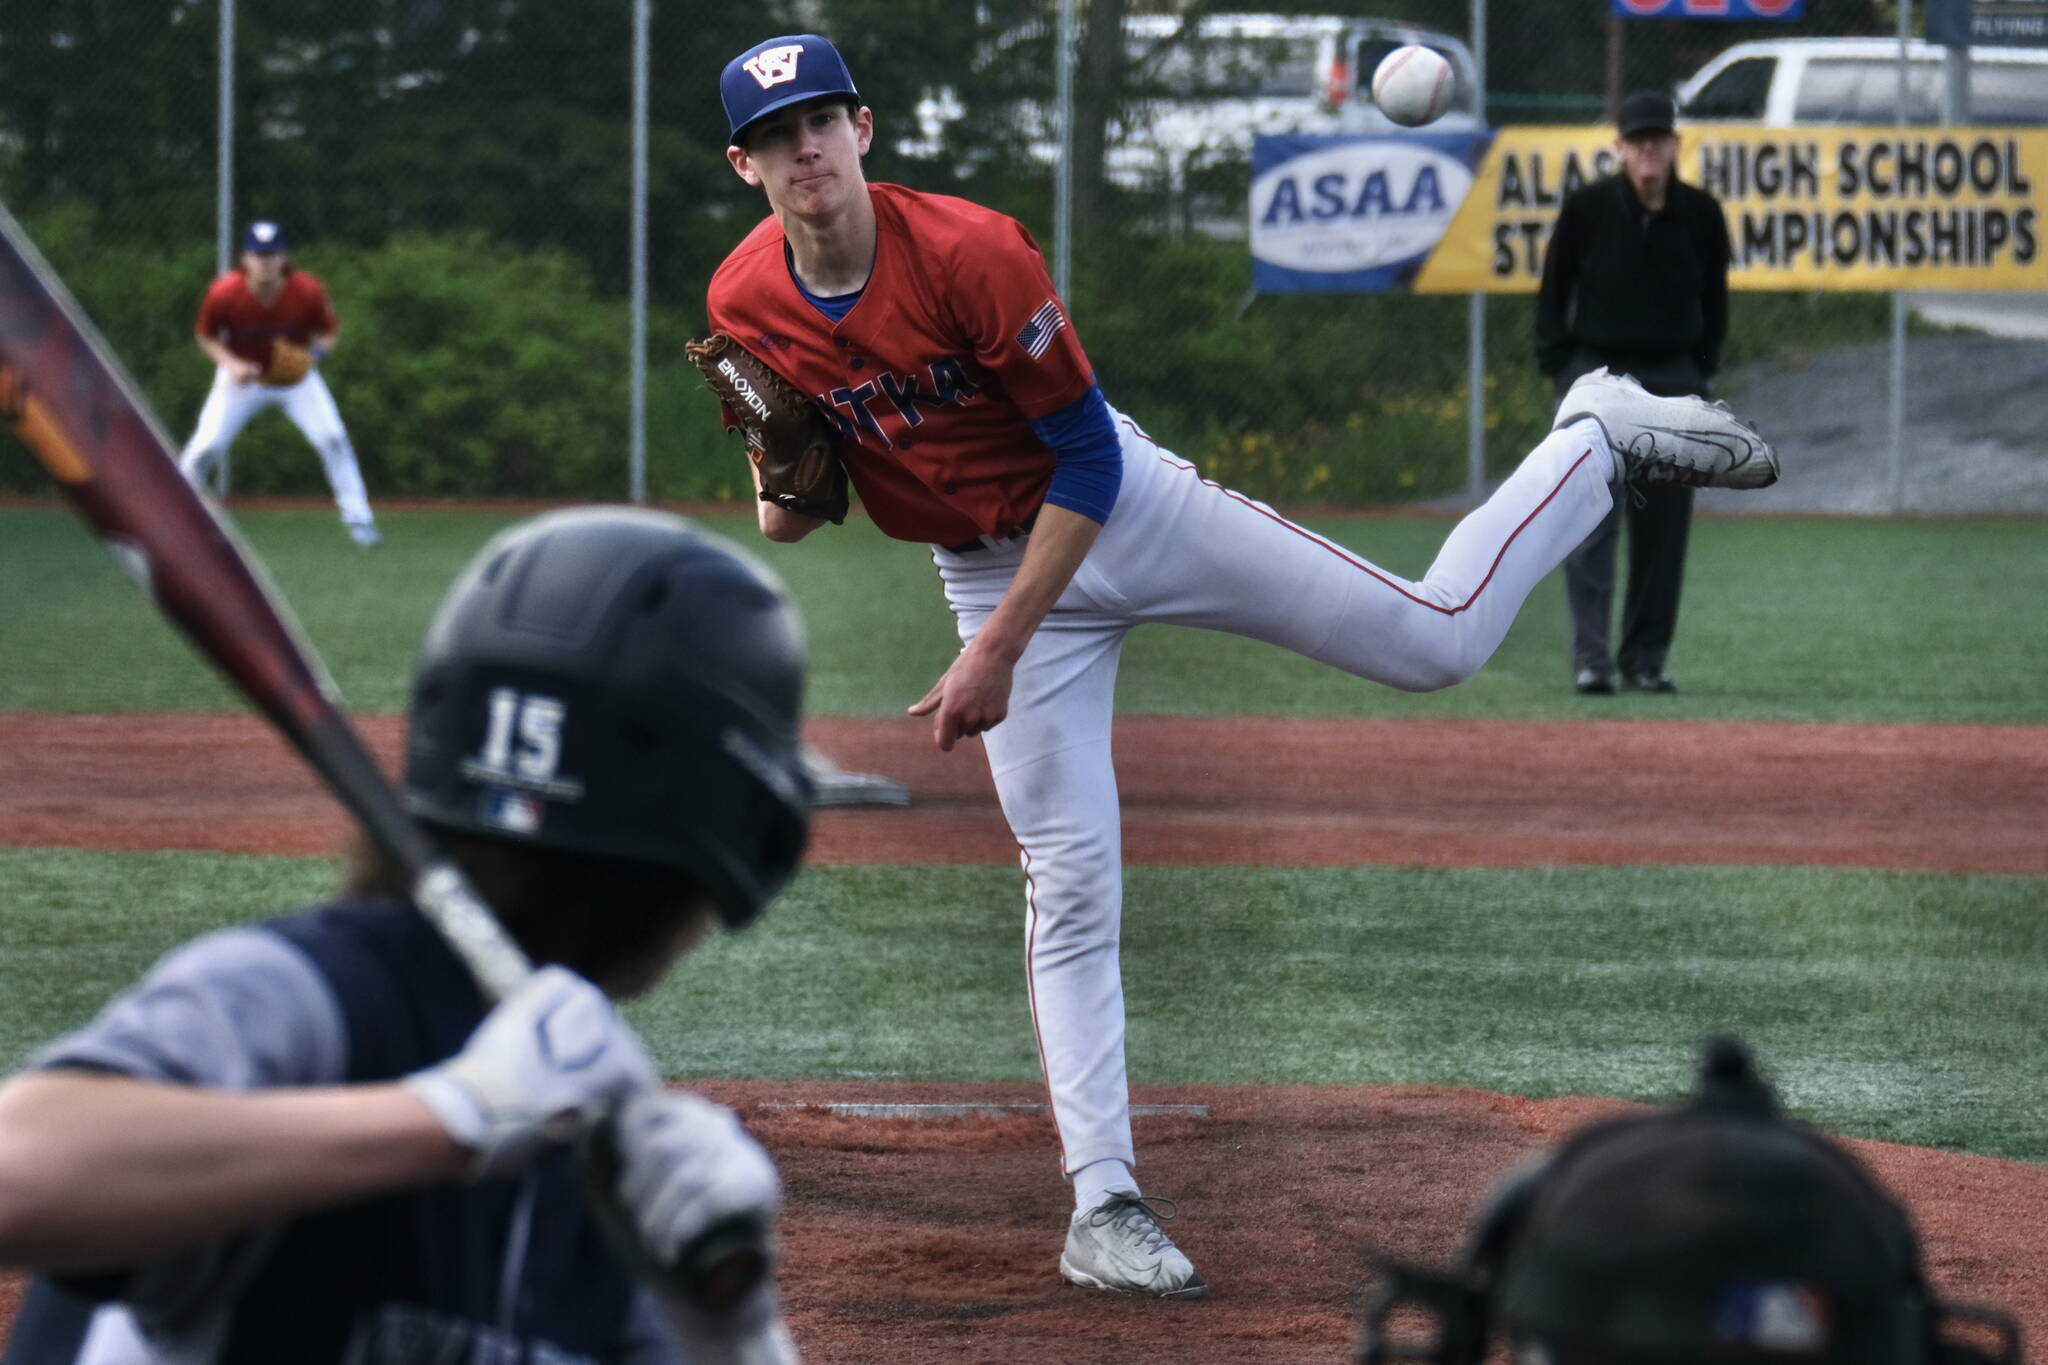 Sitka Wolves sophomore pitcher Bryce Calhoun delivers against the Eagle River Wolves during Sitka’s 6-3 loss Saturday in the 4th/6th place game of the ASAA Division I State Baseball Championships on Sitka’s Moller Field. (Klas Stolpe / Juneau Empire)